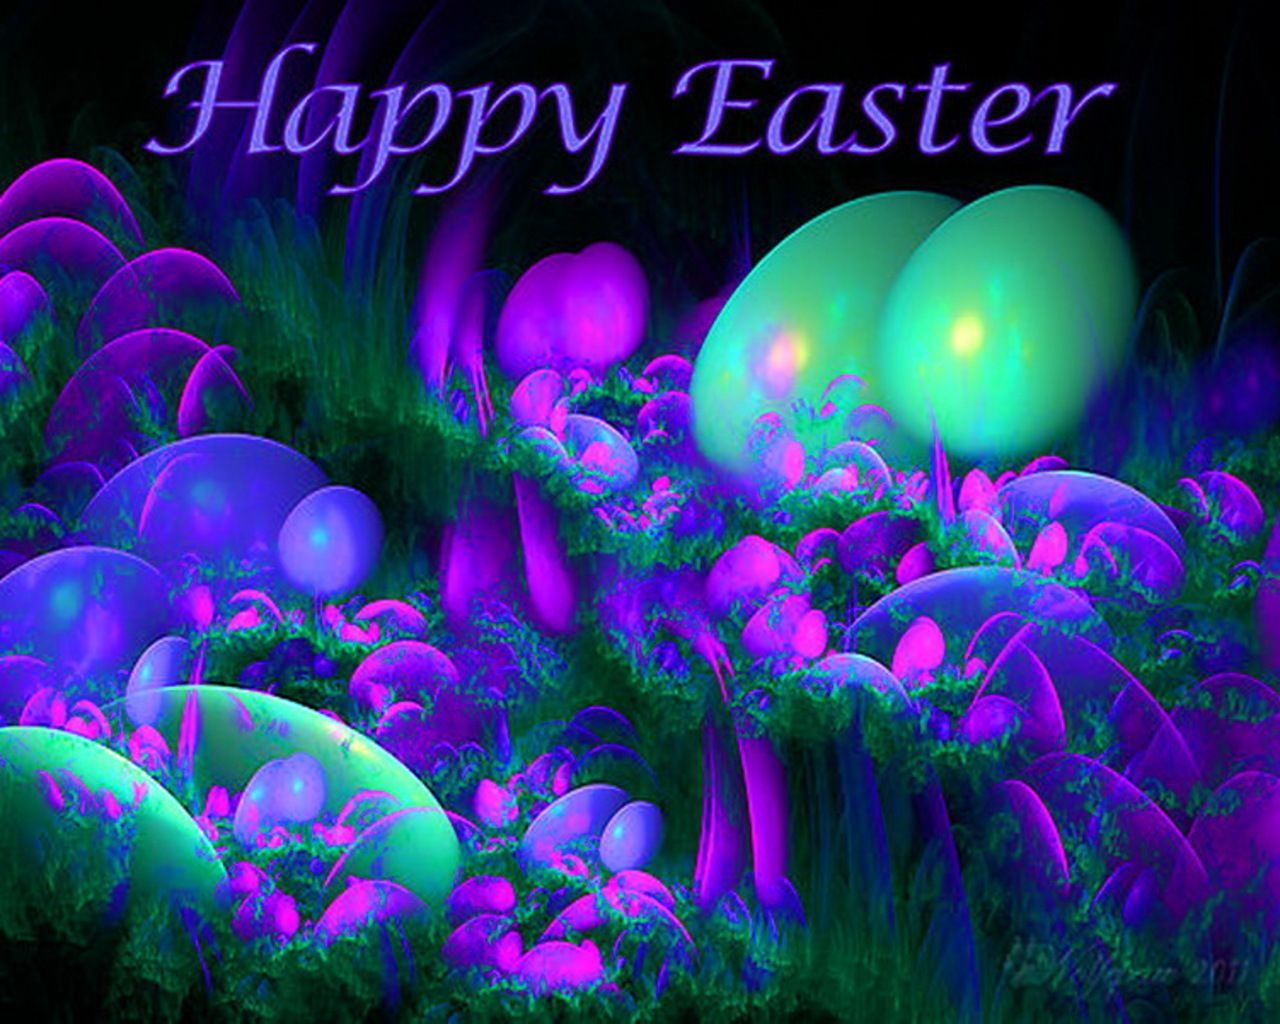 Happy Easter Image 2020 for Facebook on Easter 2020 Picture Free